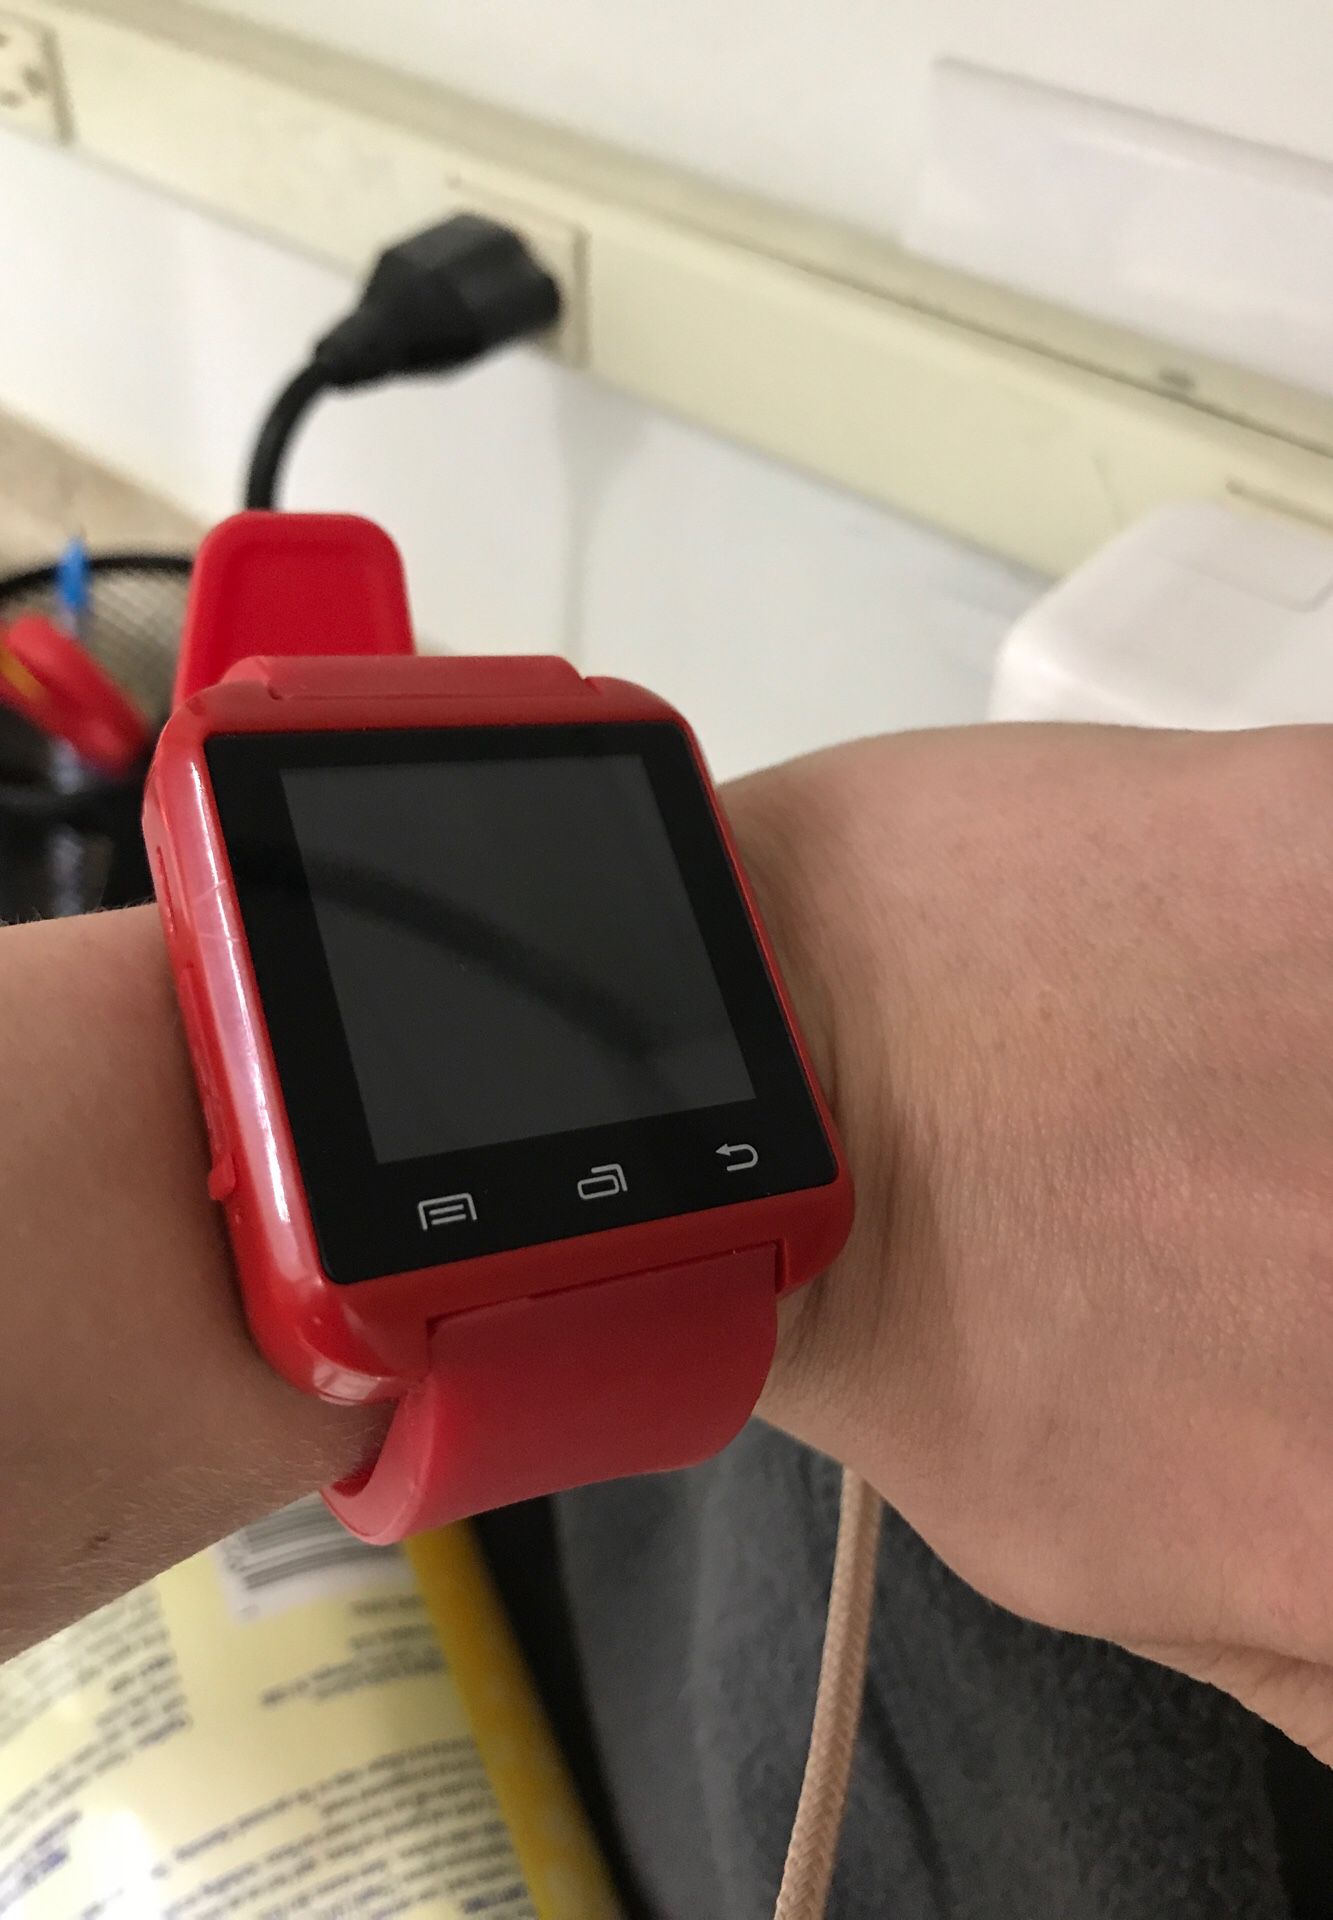 Brand new smart watch asking for 100 willing to trade for an Apple Watch